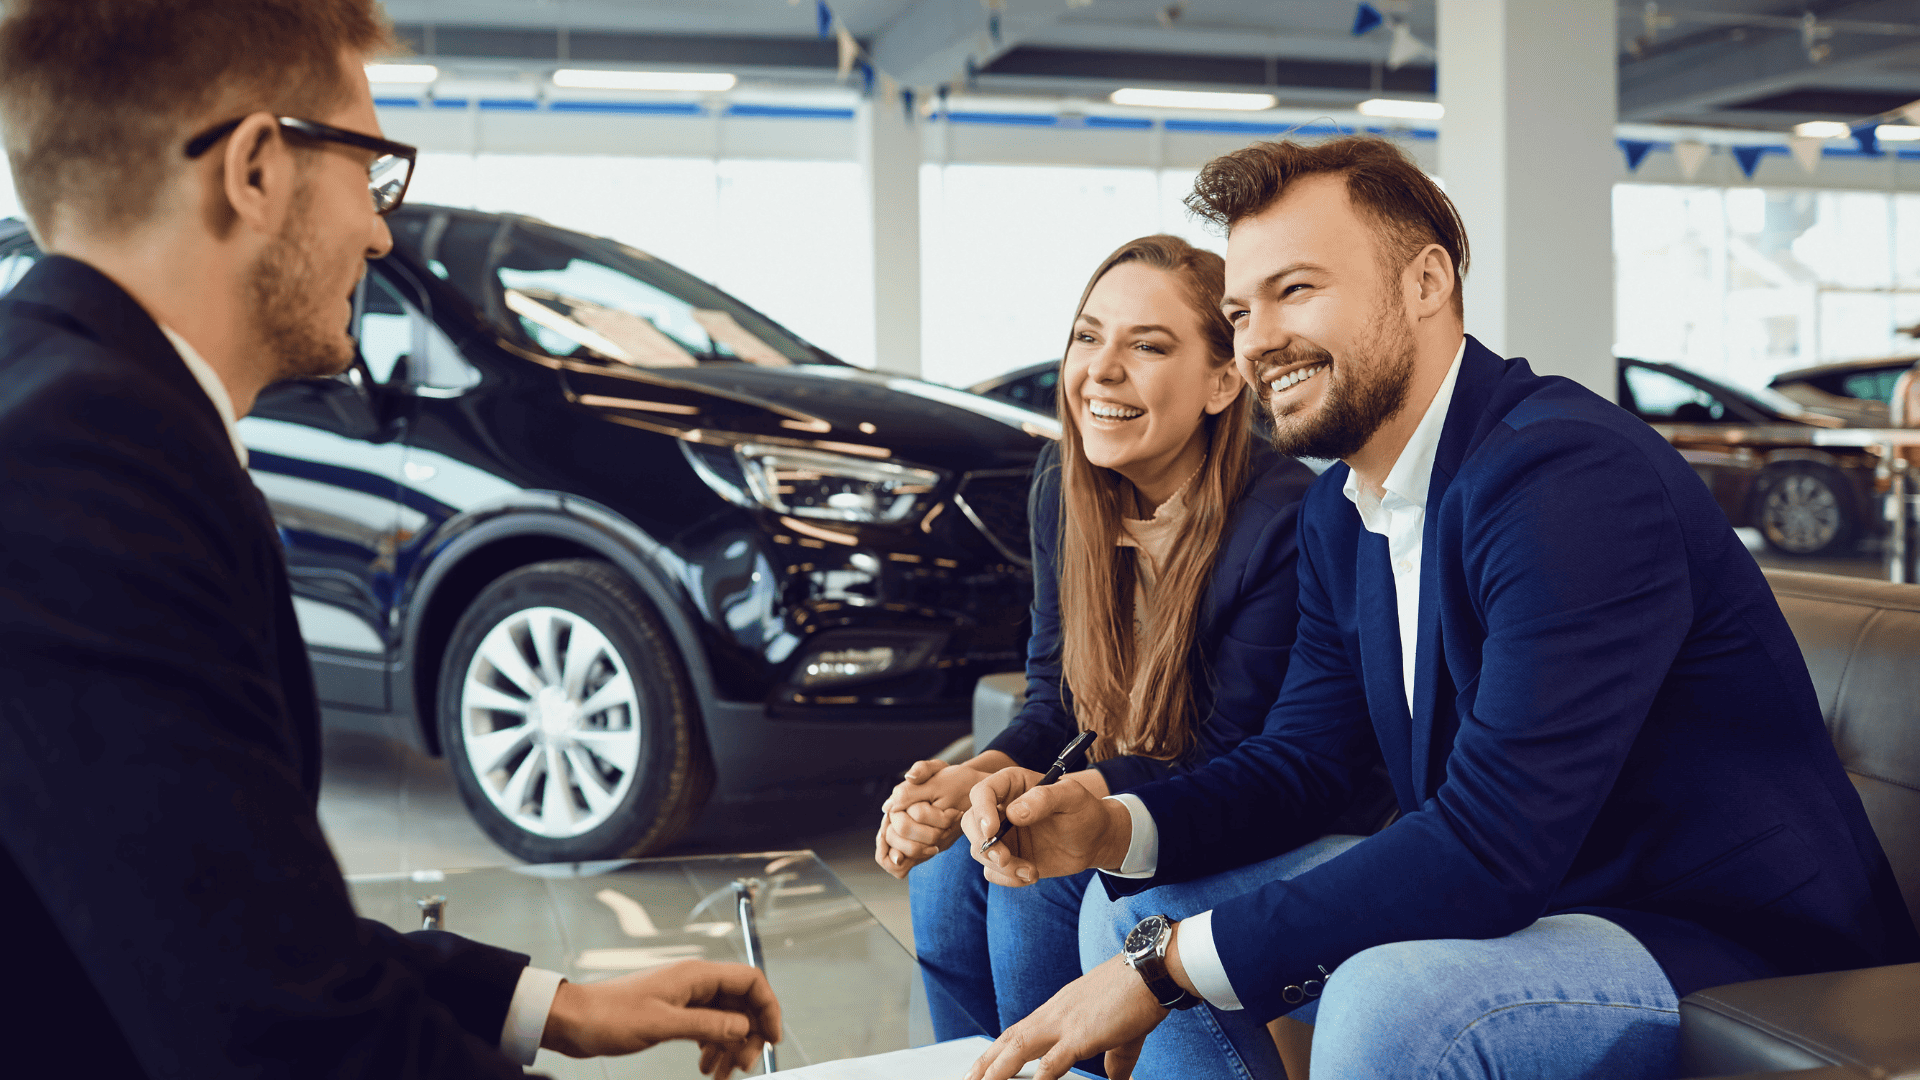 Tips to Minimize Distractions During Car Dealership Marketing